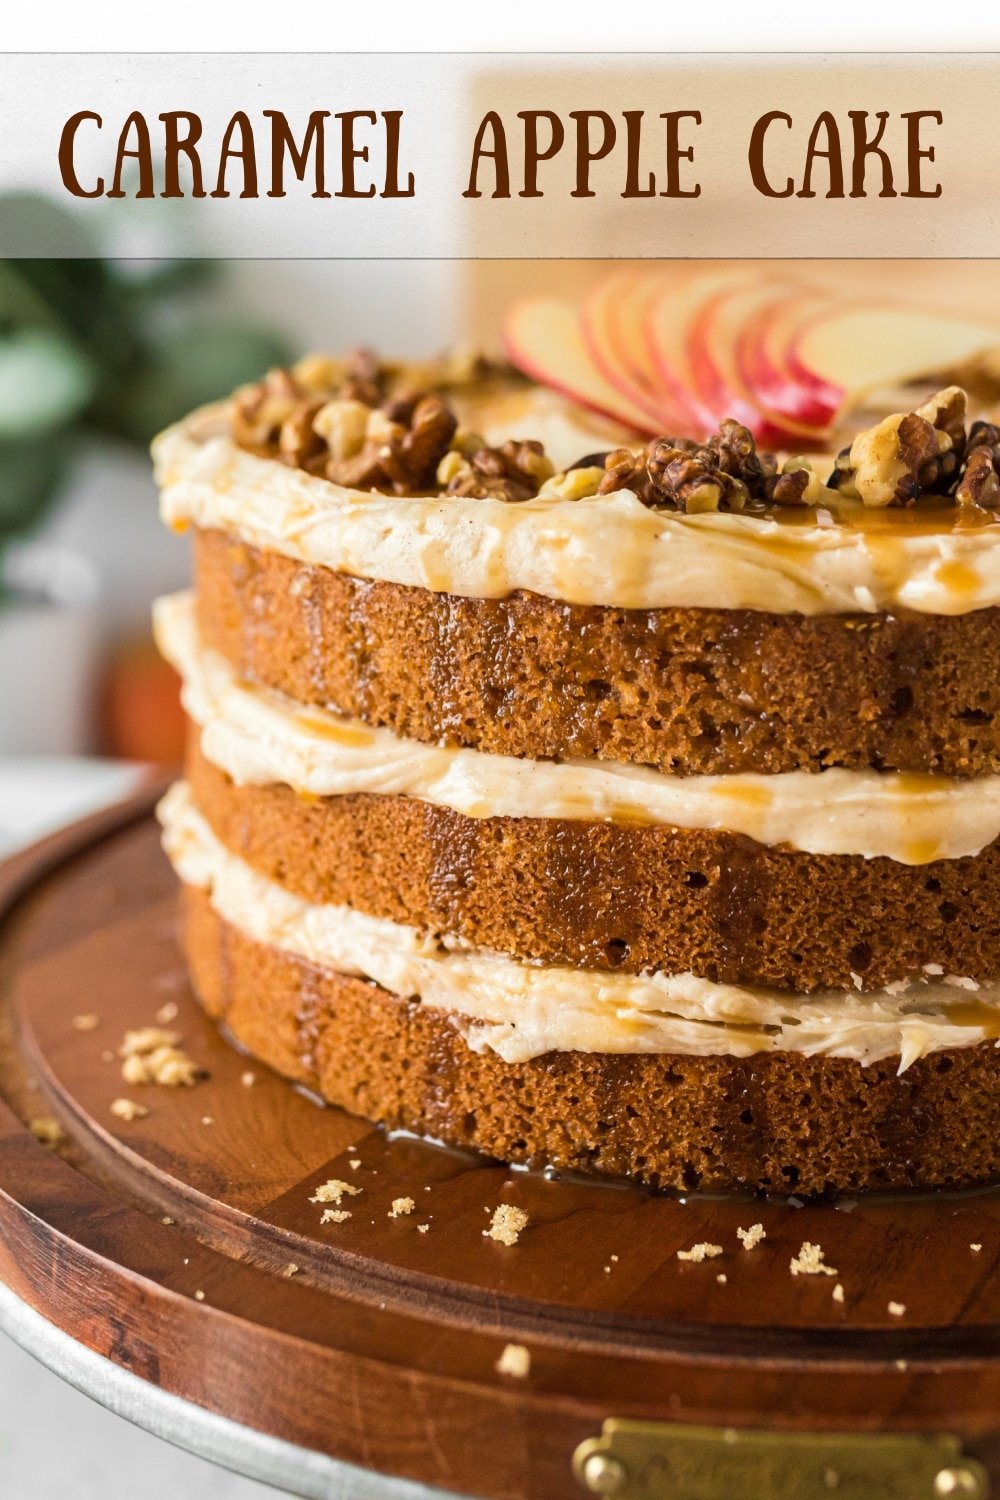 Apple cake is one of the best parts of autumn and apple picking season - and there is one easy way to make it even better. Adding caramel to the layers of this cake ensures every bite tastes like a candied apple, a perfect counterpoint to this cake's fluffy crumb texture. via @cmpollak1